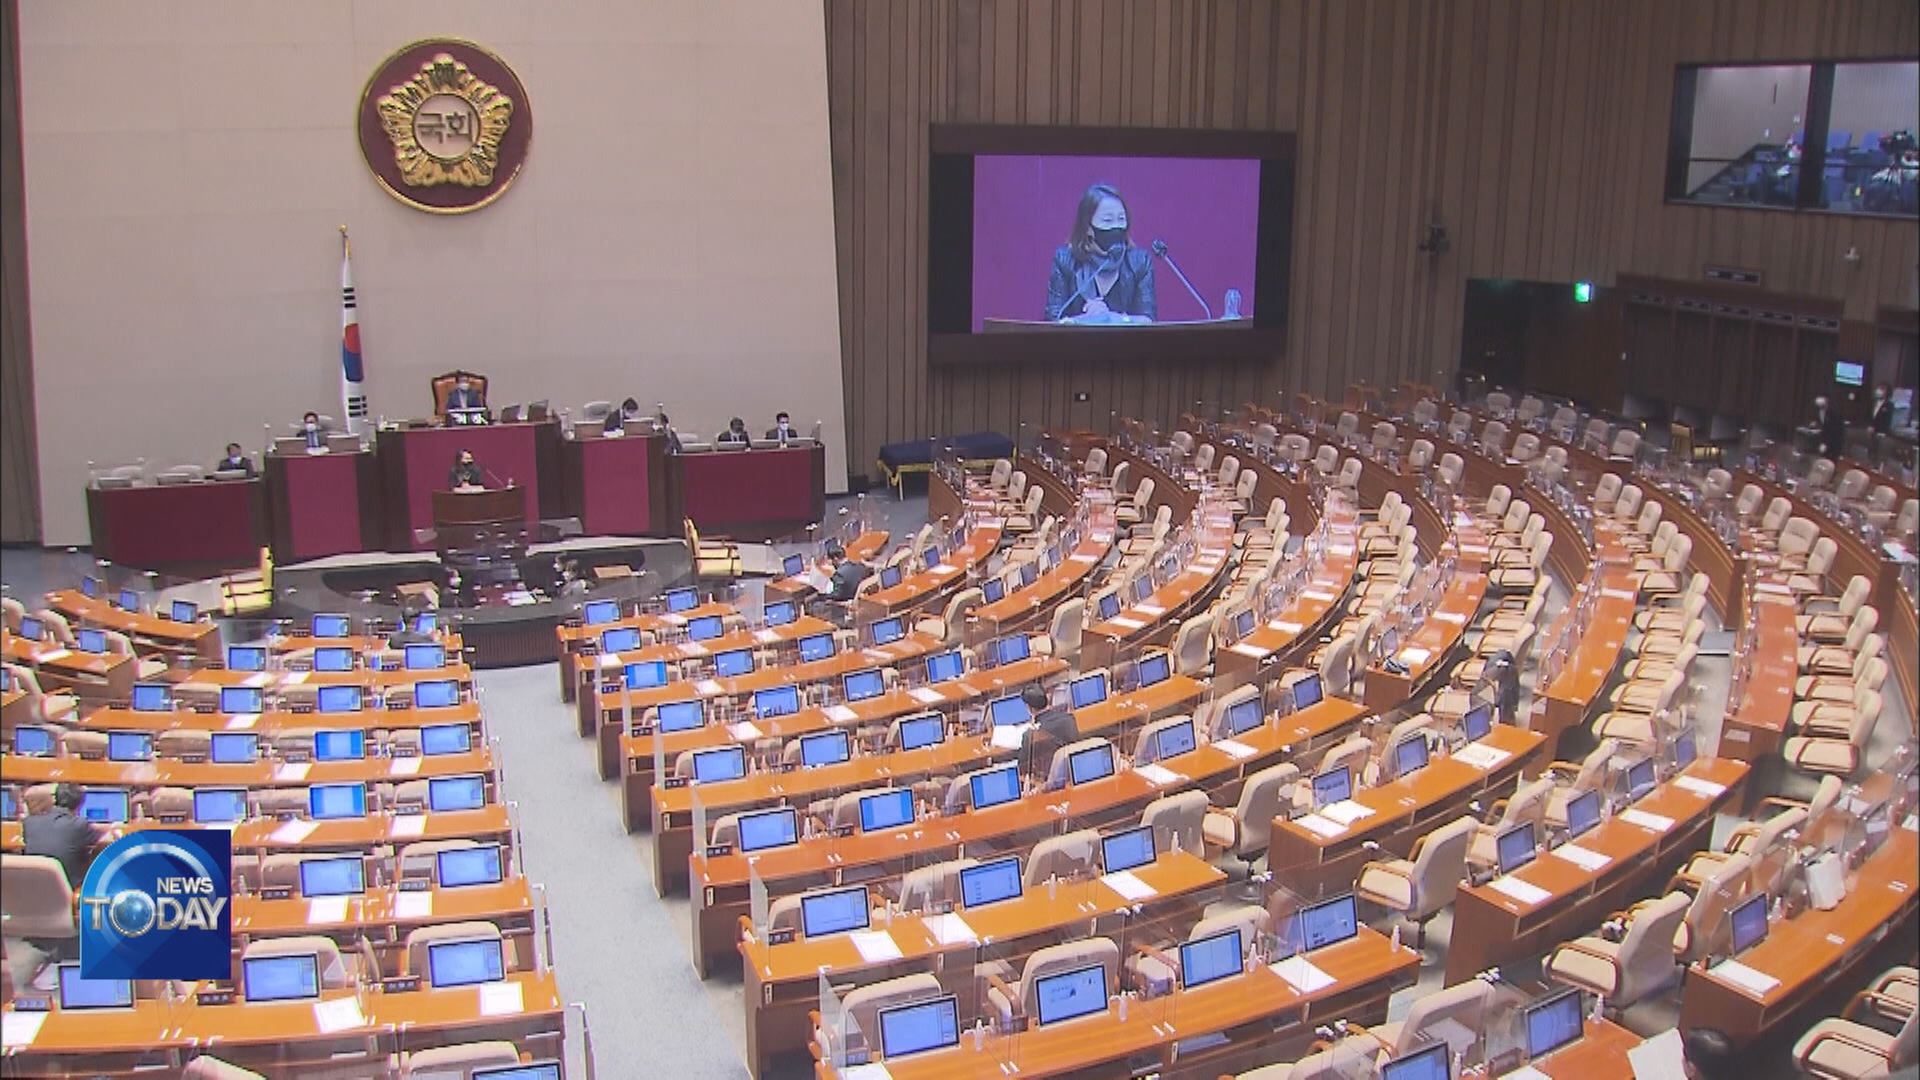 BILL RELATED TO N.KOREA PASSES PLENARY SESSION